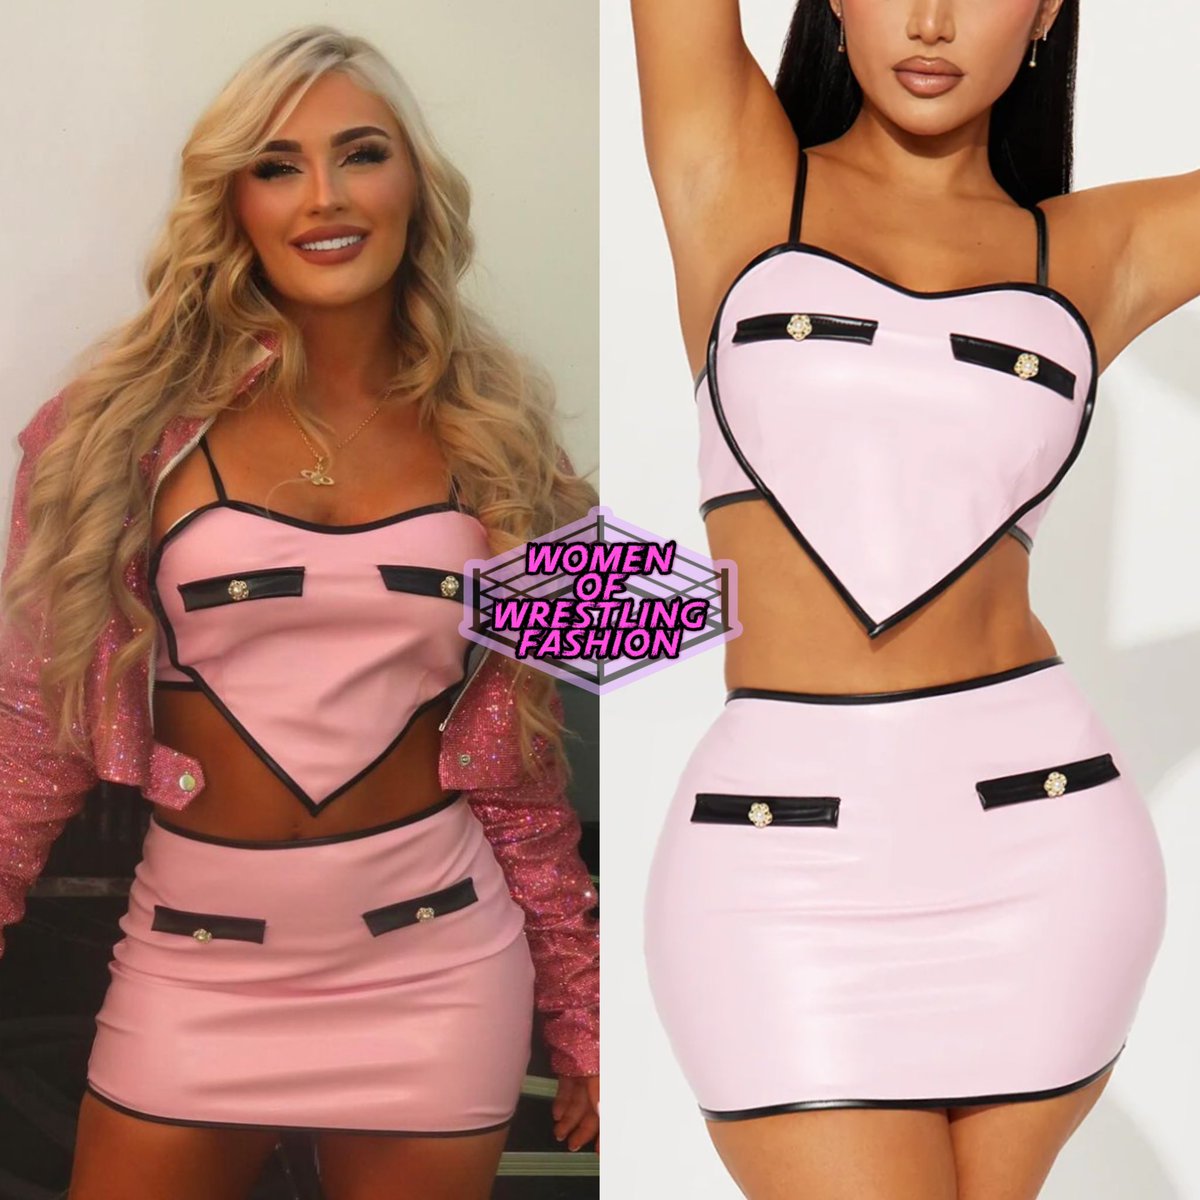 Tiffany wears the Fully in Love Faux Leather Skirt Set from Fashion Nova ($39.99)